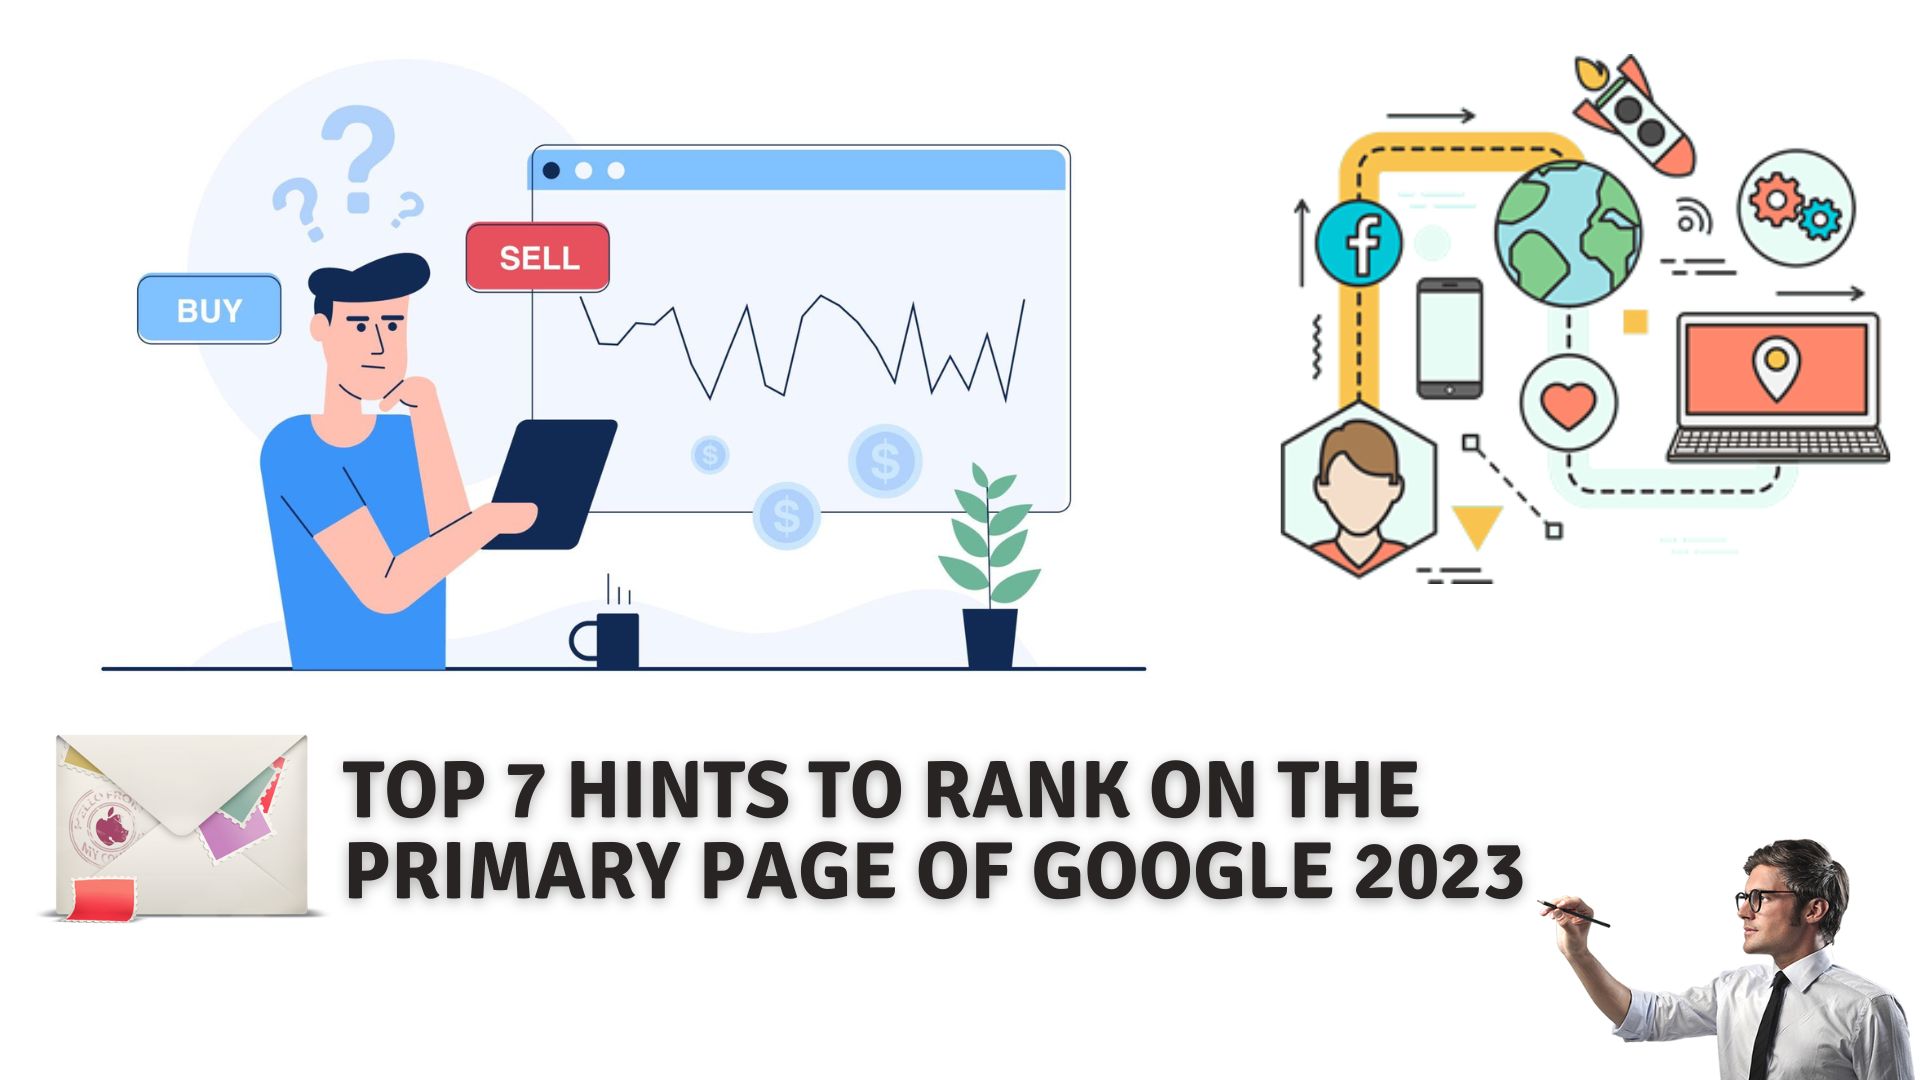 Top 7 hints to rank on the primary page of google 2023